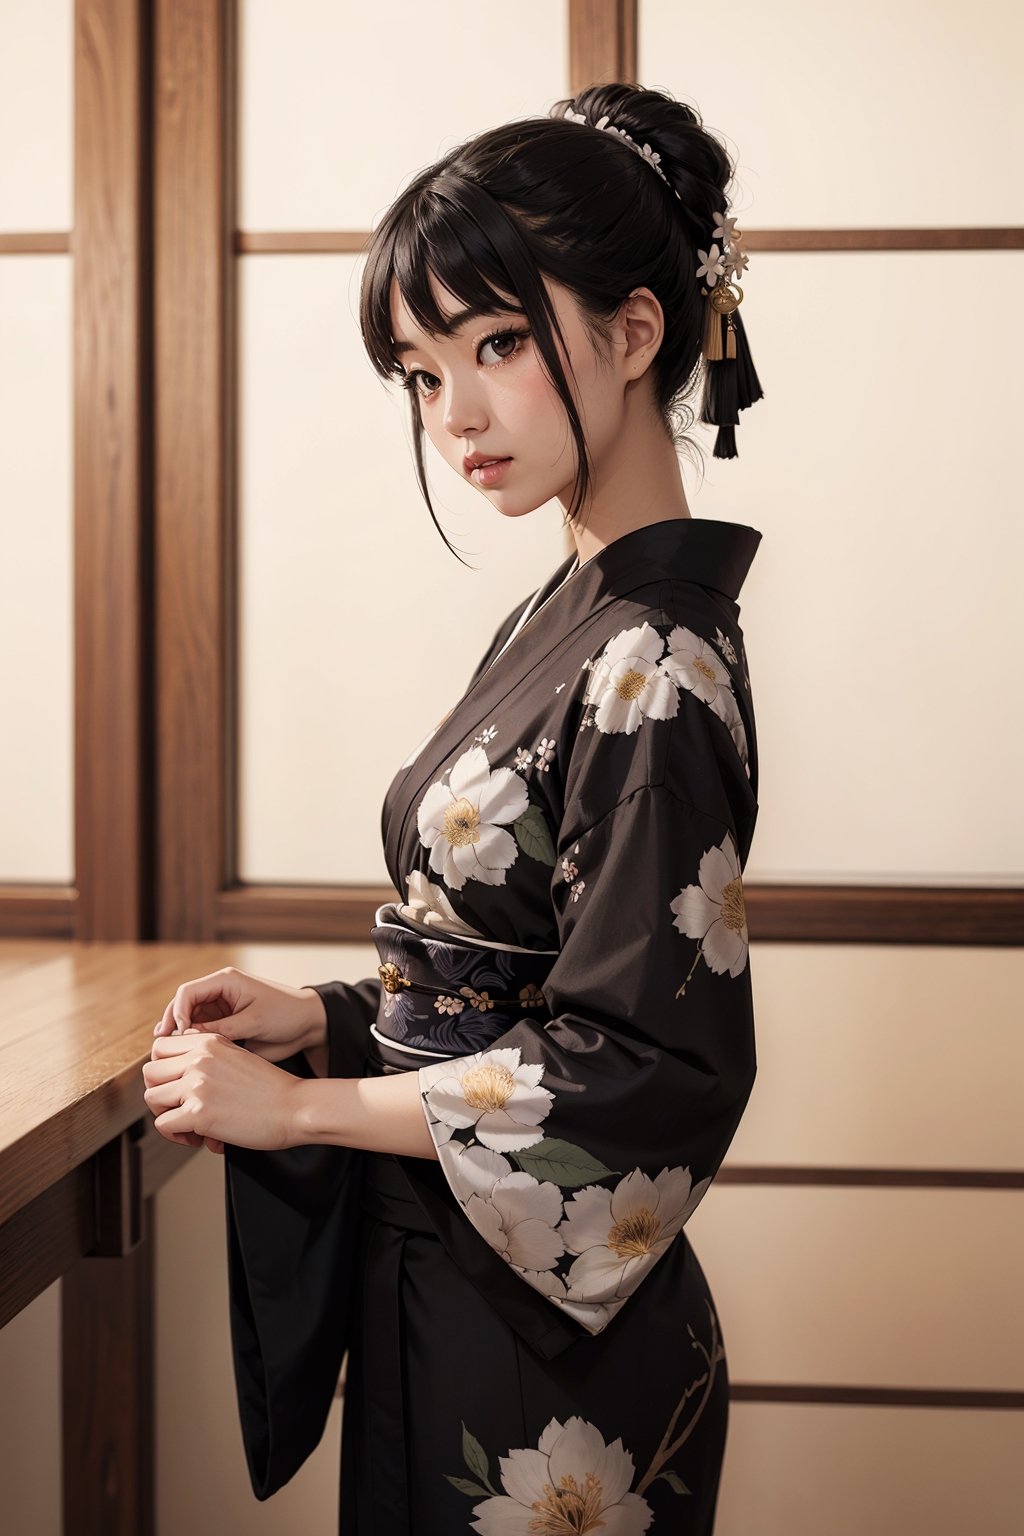 A captivating Japanese girl in a jet black kimono adorned with delicate white flowery prints, exuding timeless elegance and cultural grace.